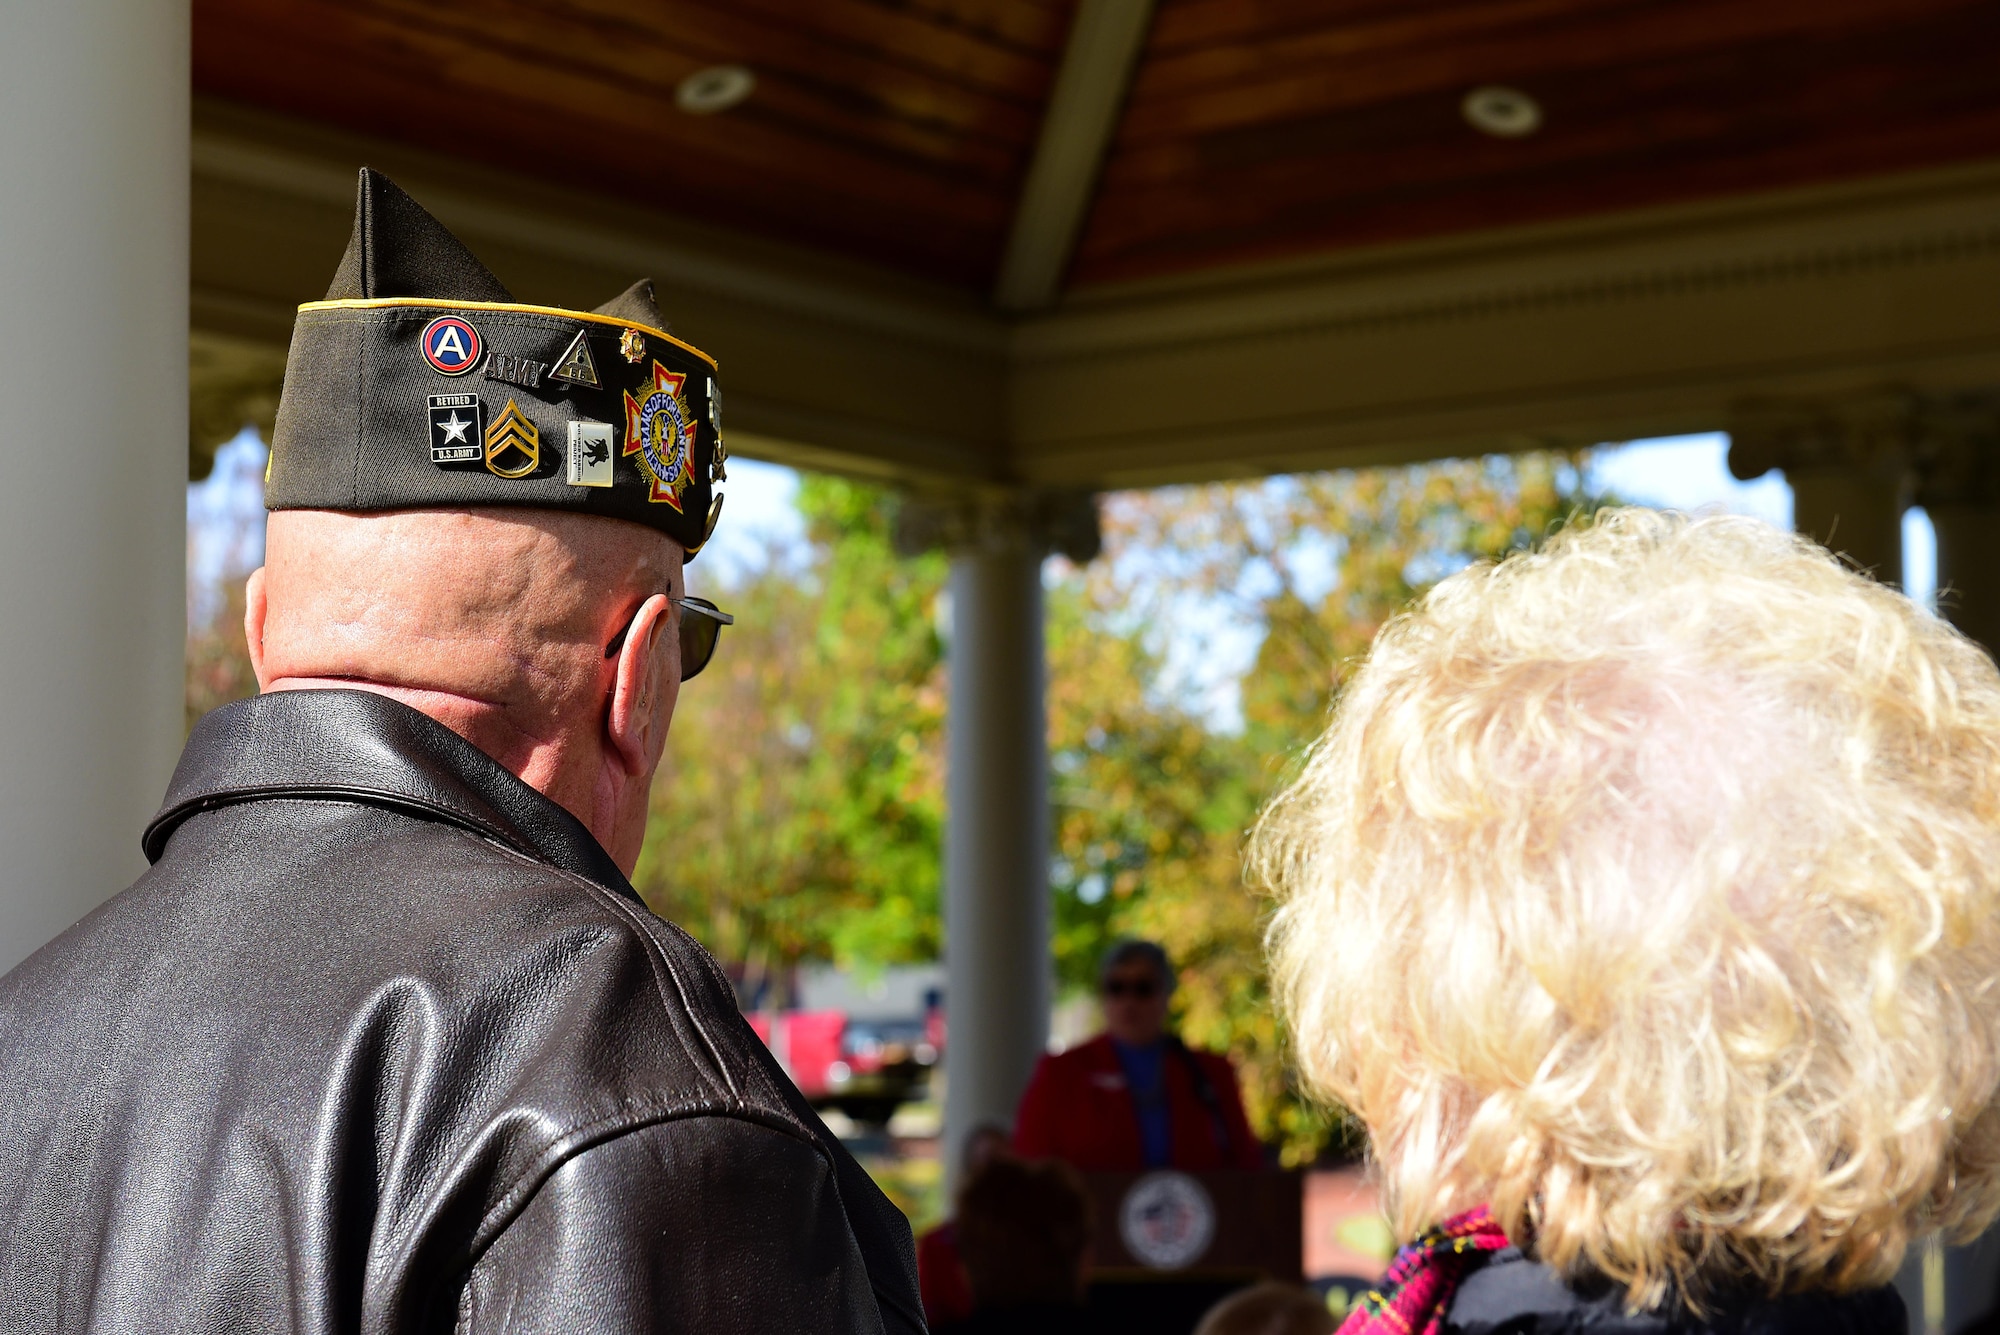 A retired veteran attends the Remembrance and Wreath Laying Ceremony, Nov. 11, 2017, at the Wayne County Veterans Memorial, Goldsboro, North Carolina. More than 20 people attended the ceremony. (U.S. Air Force photo by Airman 1st Class Kenneth Boyton)